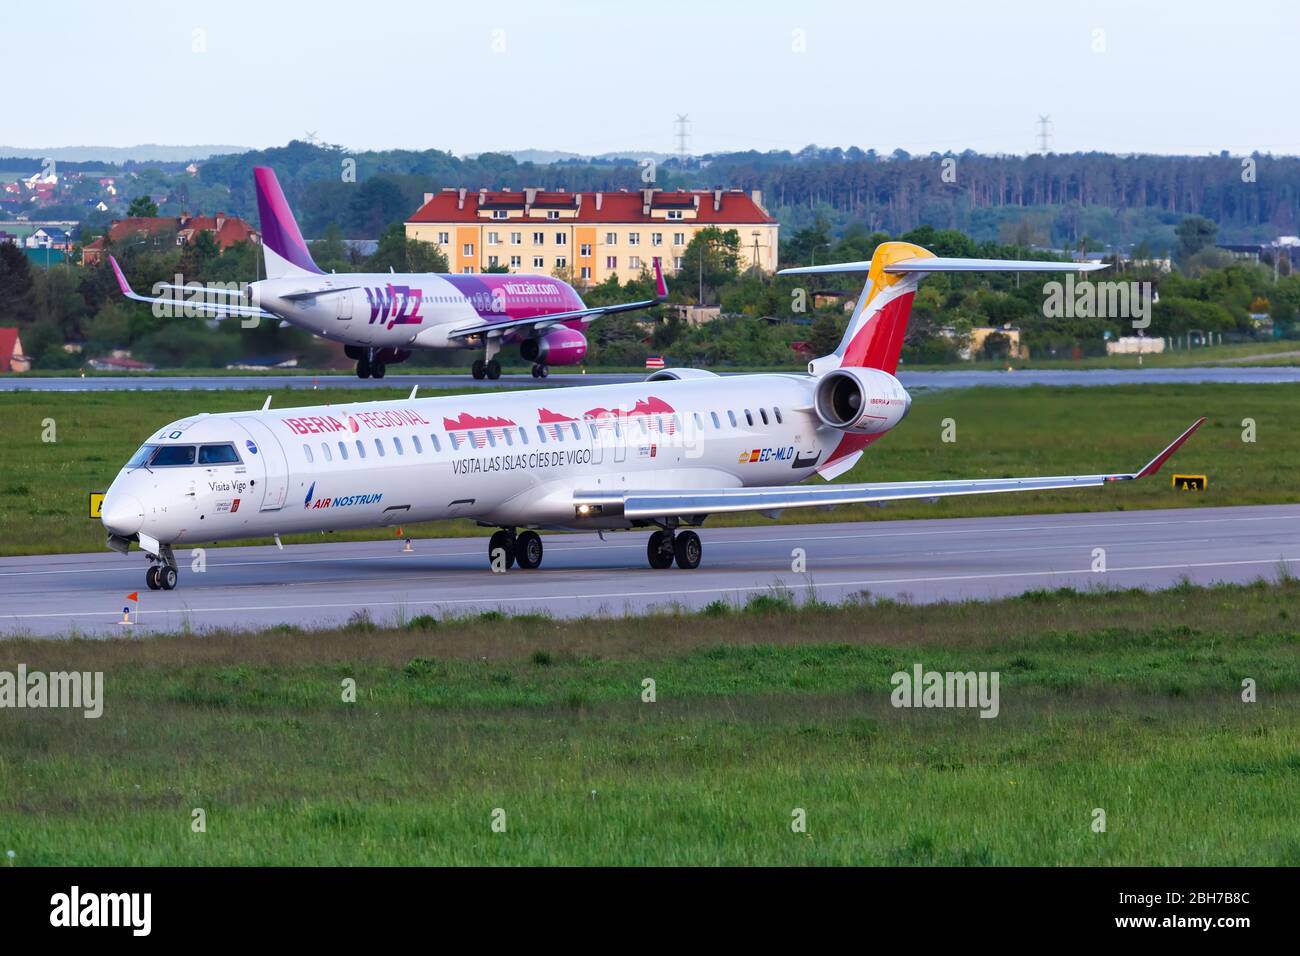 Gdansk, Poland – May 29, 2019: Iberia Regional Air Nostrum Bombardier CRJ-1000 airplane at Gdansk airport (GDN) in Poland. Stock Photo